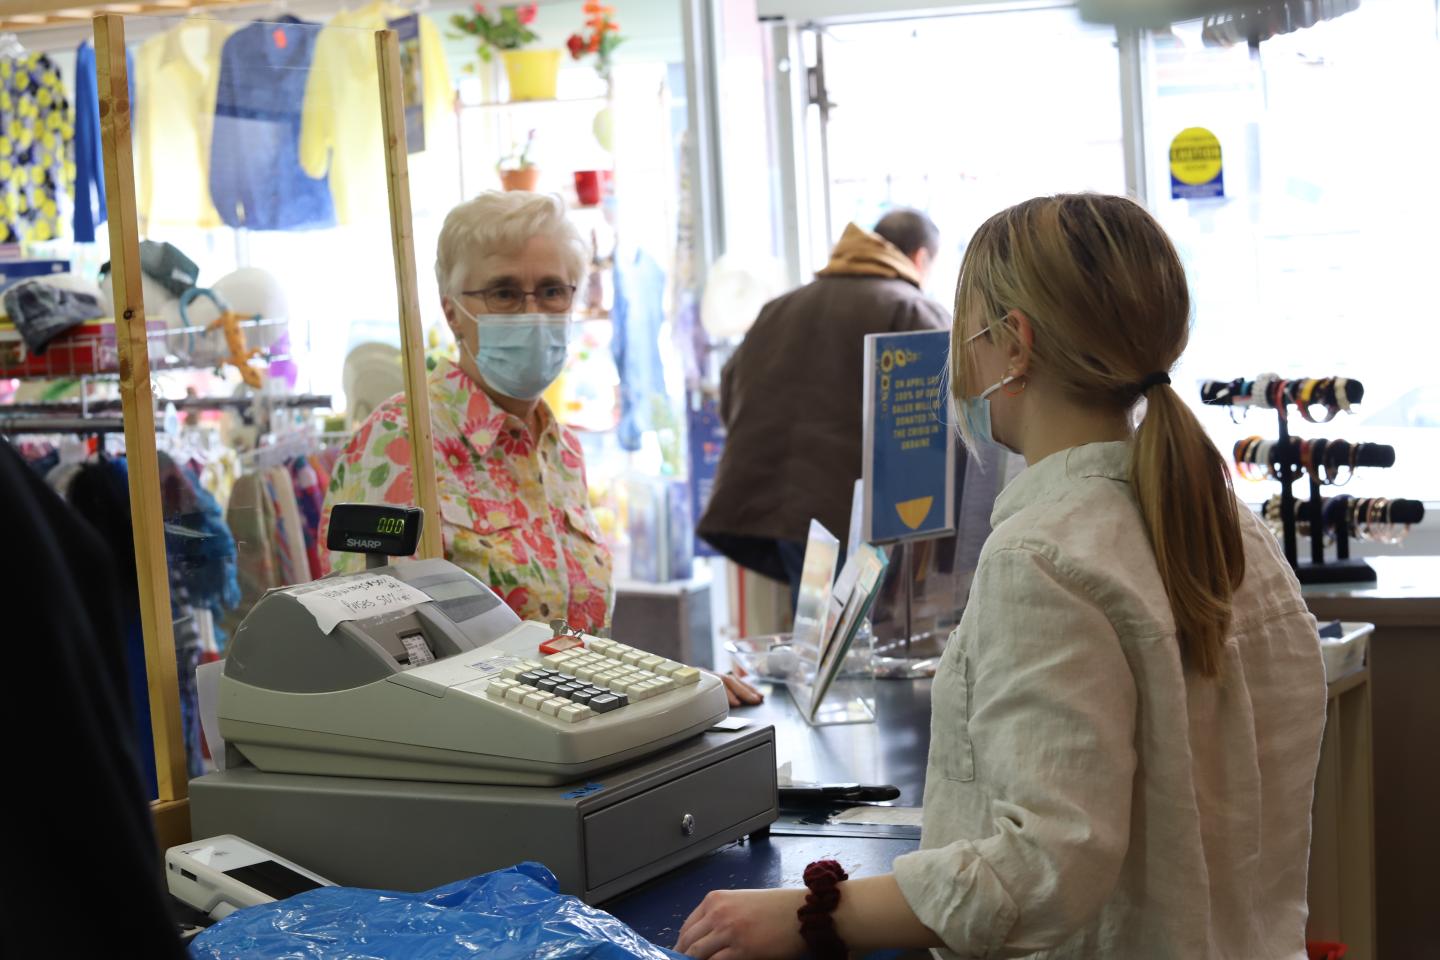 An older woman in a floral shirt and face masks stands in front of a cashier counter at a thrift shop.